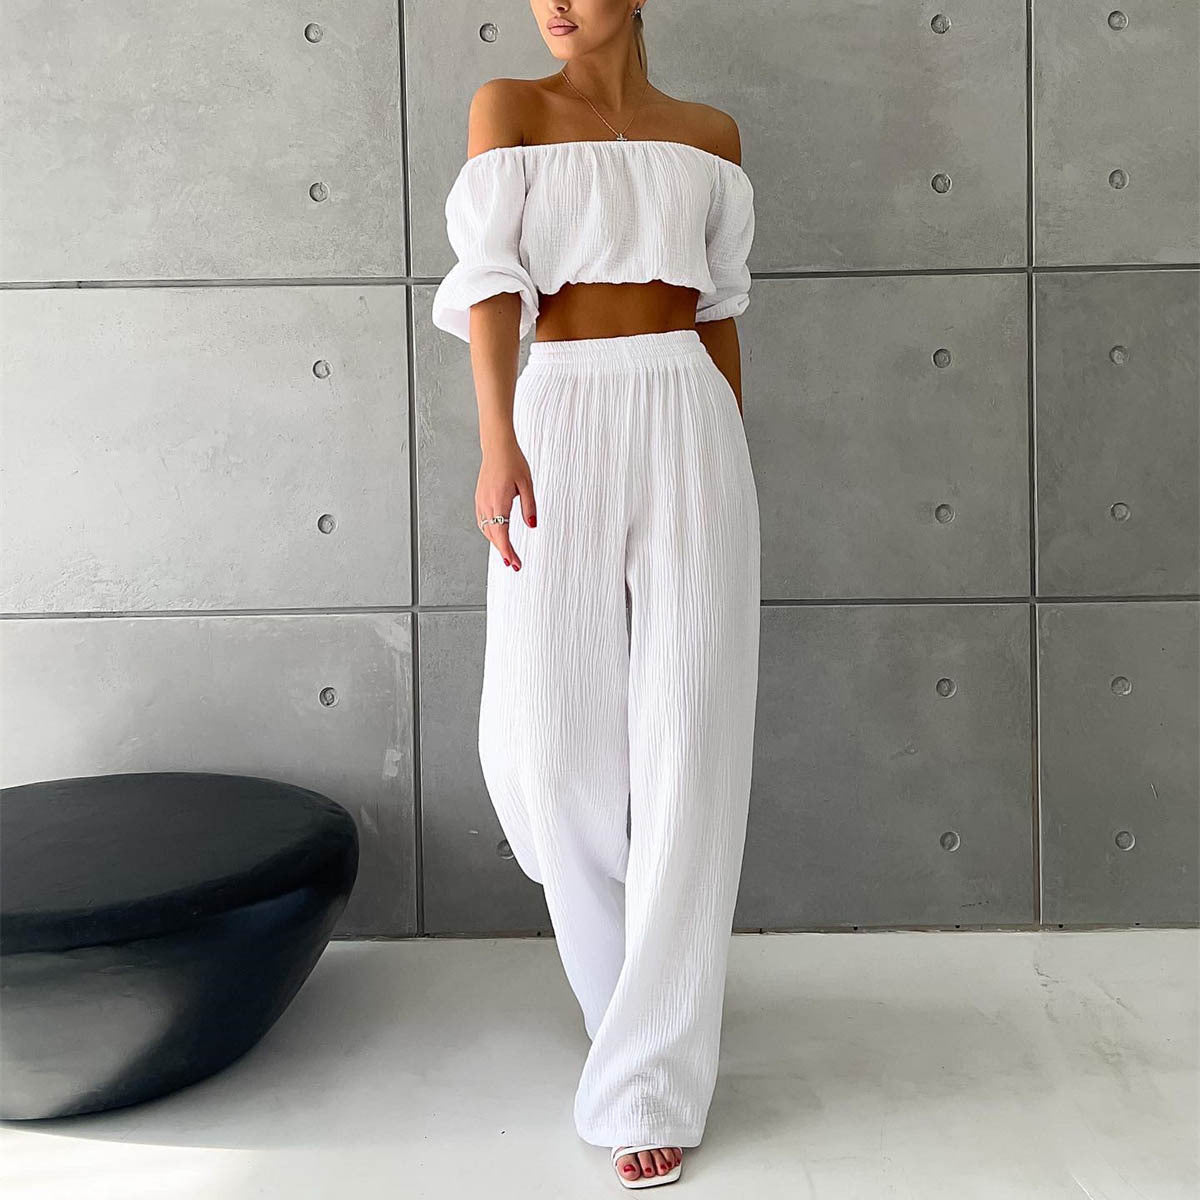 Two Piece Women Summer Pure Cotton Champray Solid Color off Neck Short Sleeved Top High Waist Wide Leg Pants Casual Suit